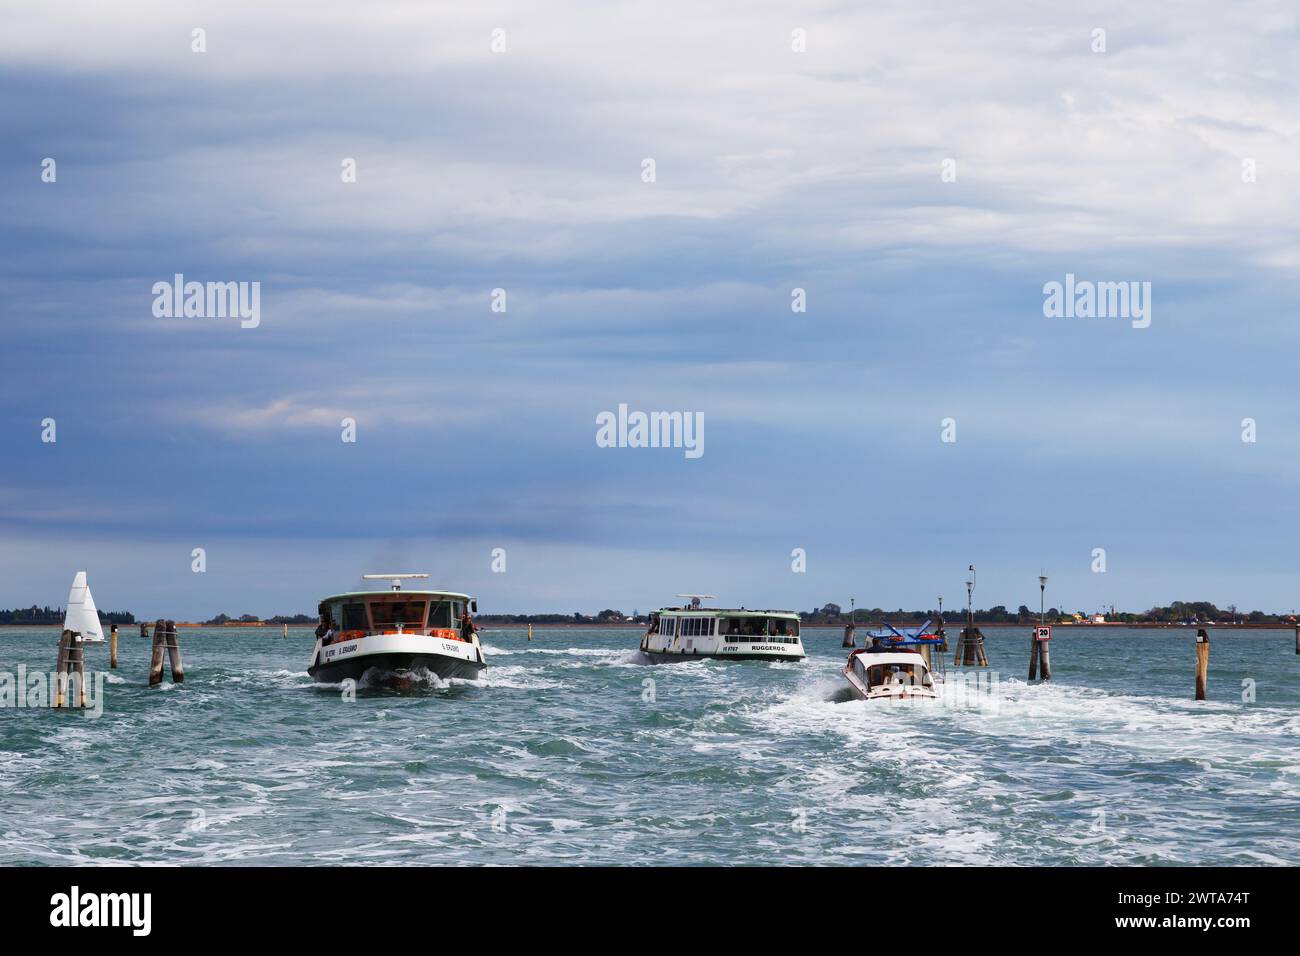 Venice, Italy - October, 6 2019: Vaporetti or Venetian public water buses and water taxi. Public transport route, city's traffic in Venice, Italy. Stock Photo